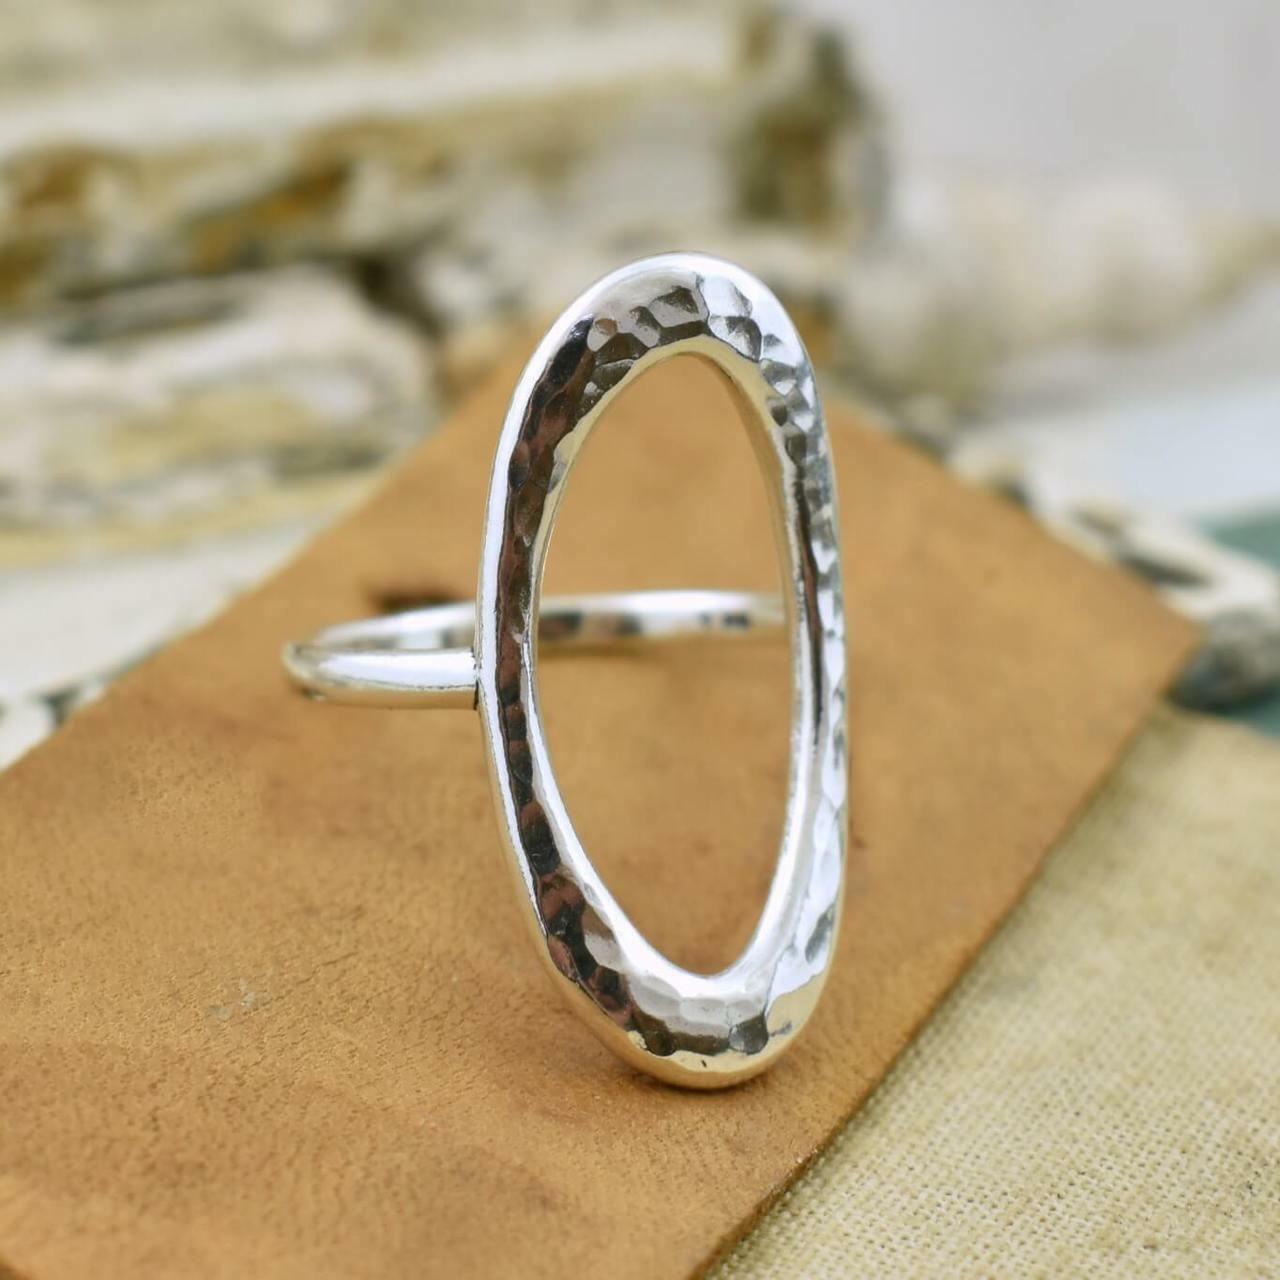 Handcrafted hammered sterling silver ring